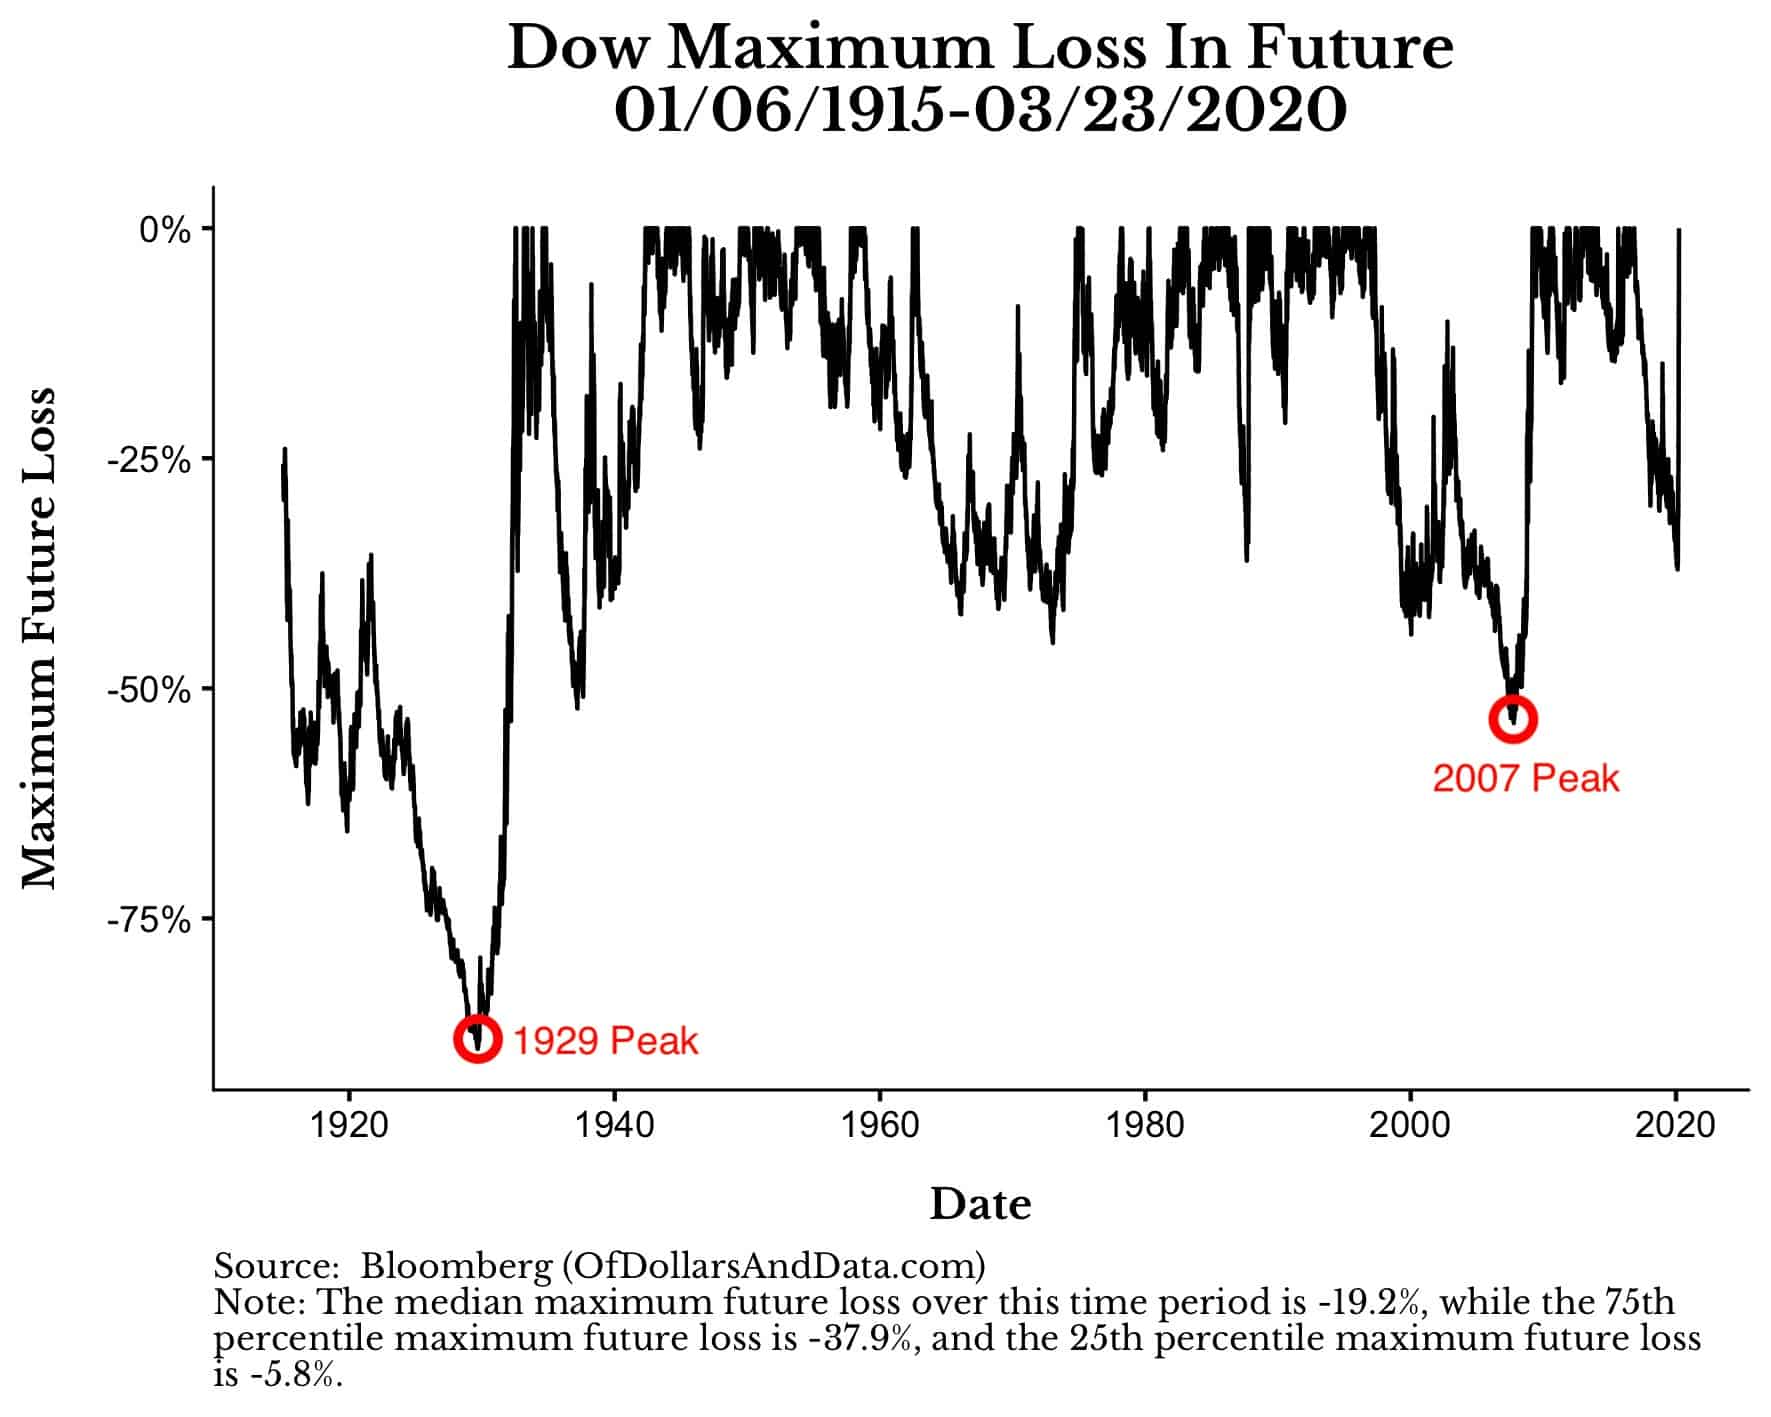 Dow Maximum loss in its future from 1915 to 2020.